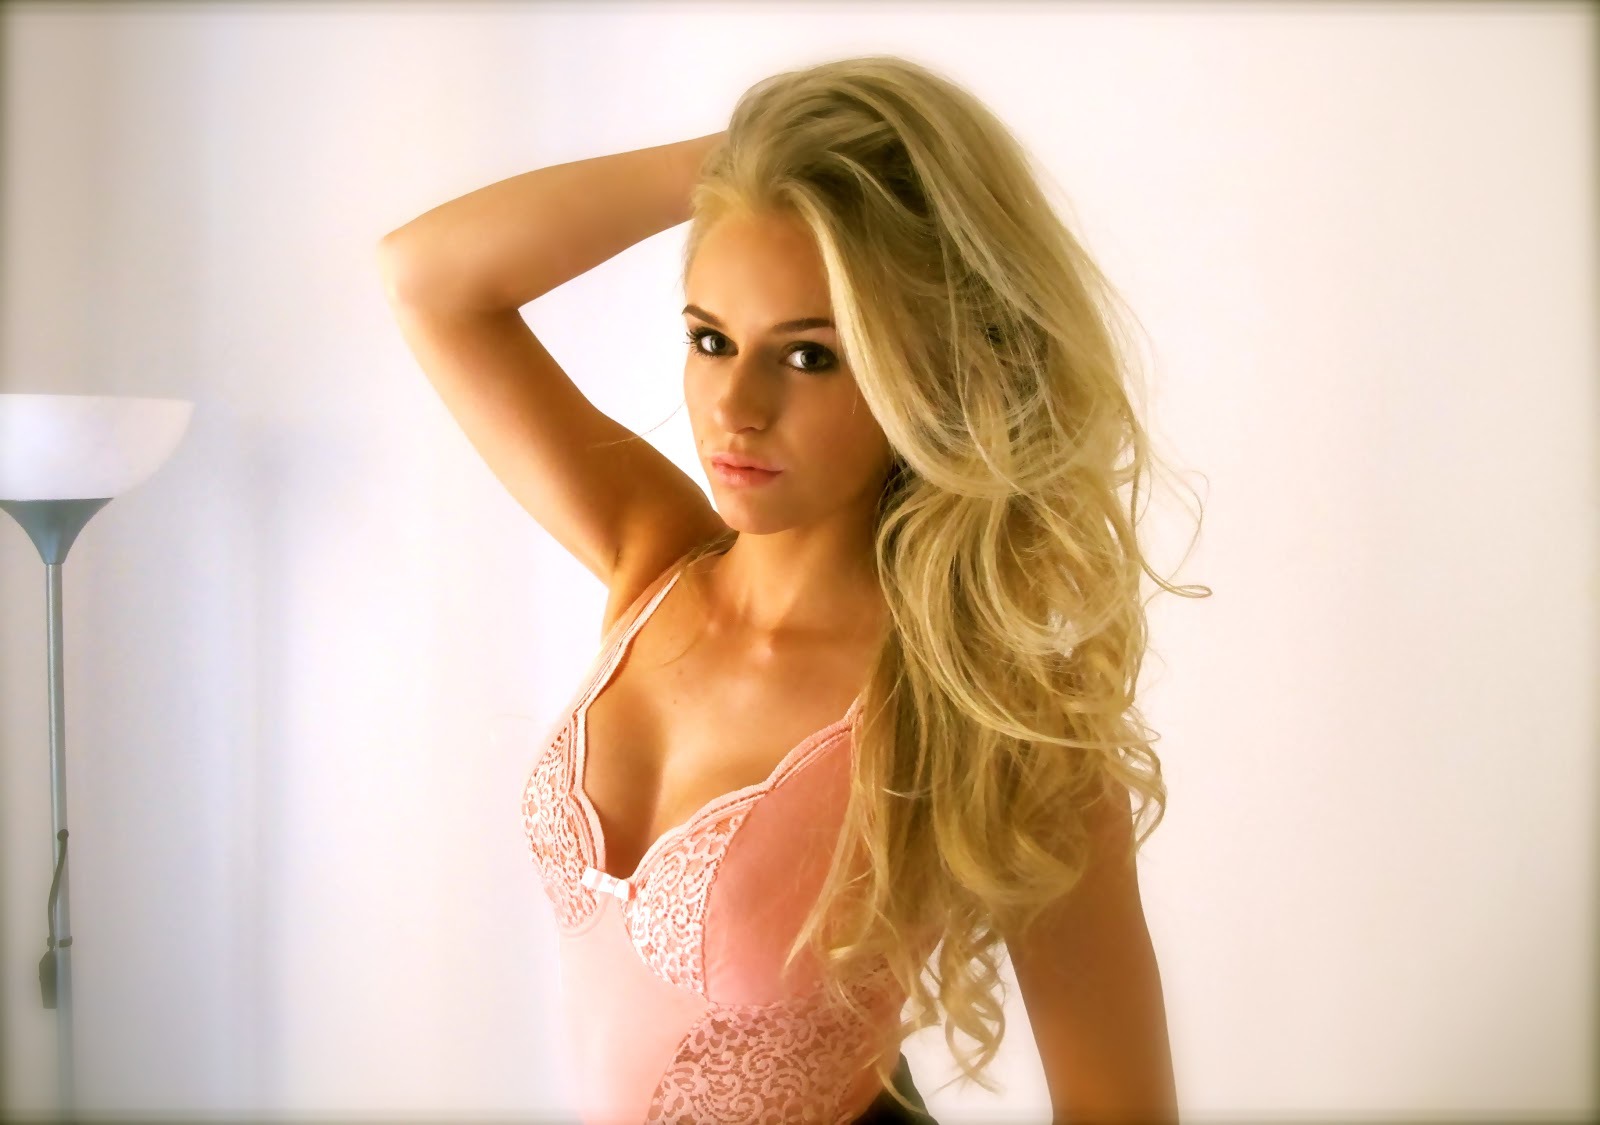 Anna Nystrom Wallpapers Images Photos Pictures Backgrounds Images, Photos, Reviews